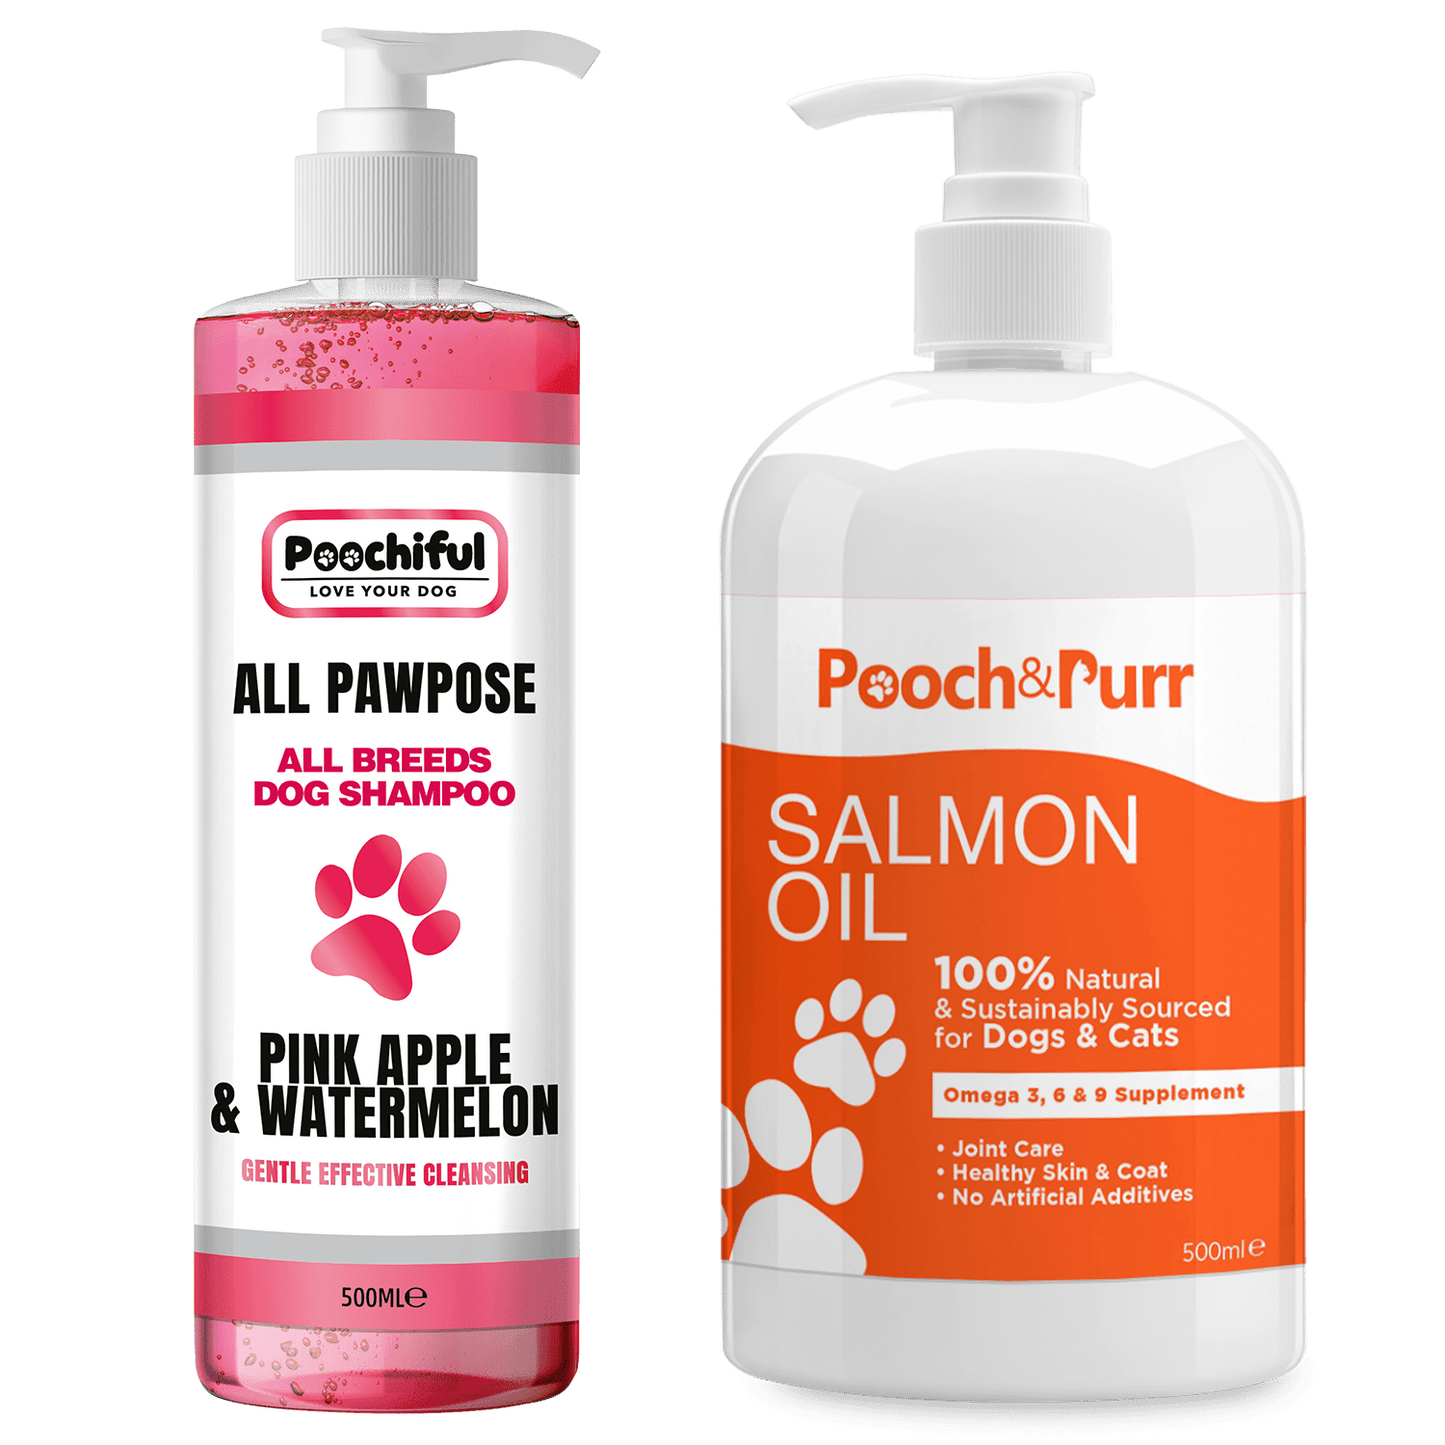 All Pawpose 500ml + Pooch And Purr Salmon Oil 500ml Bundle